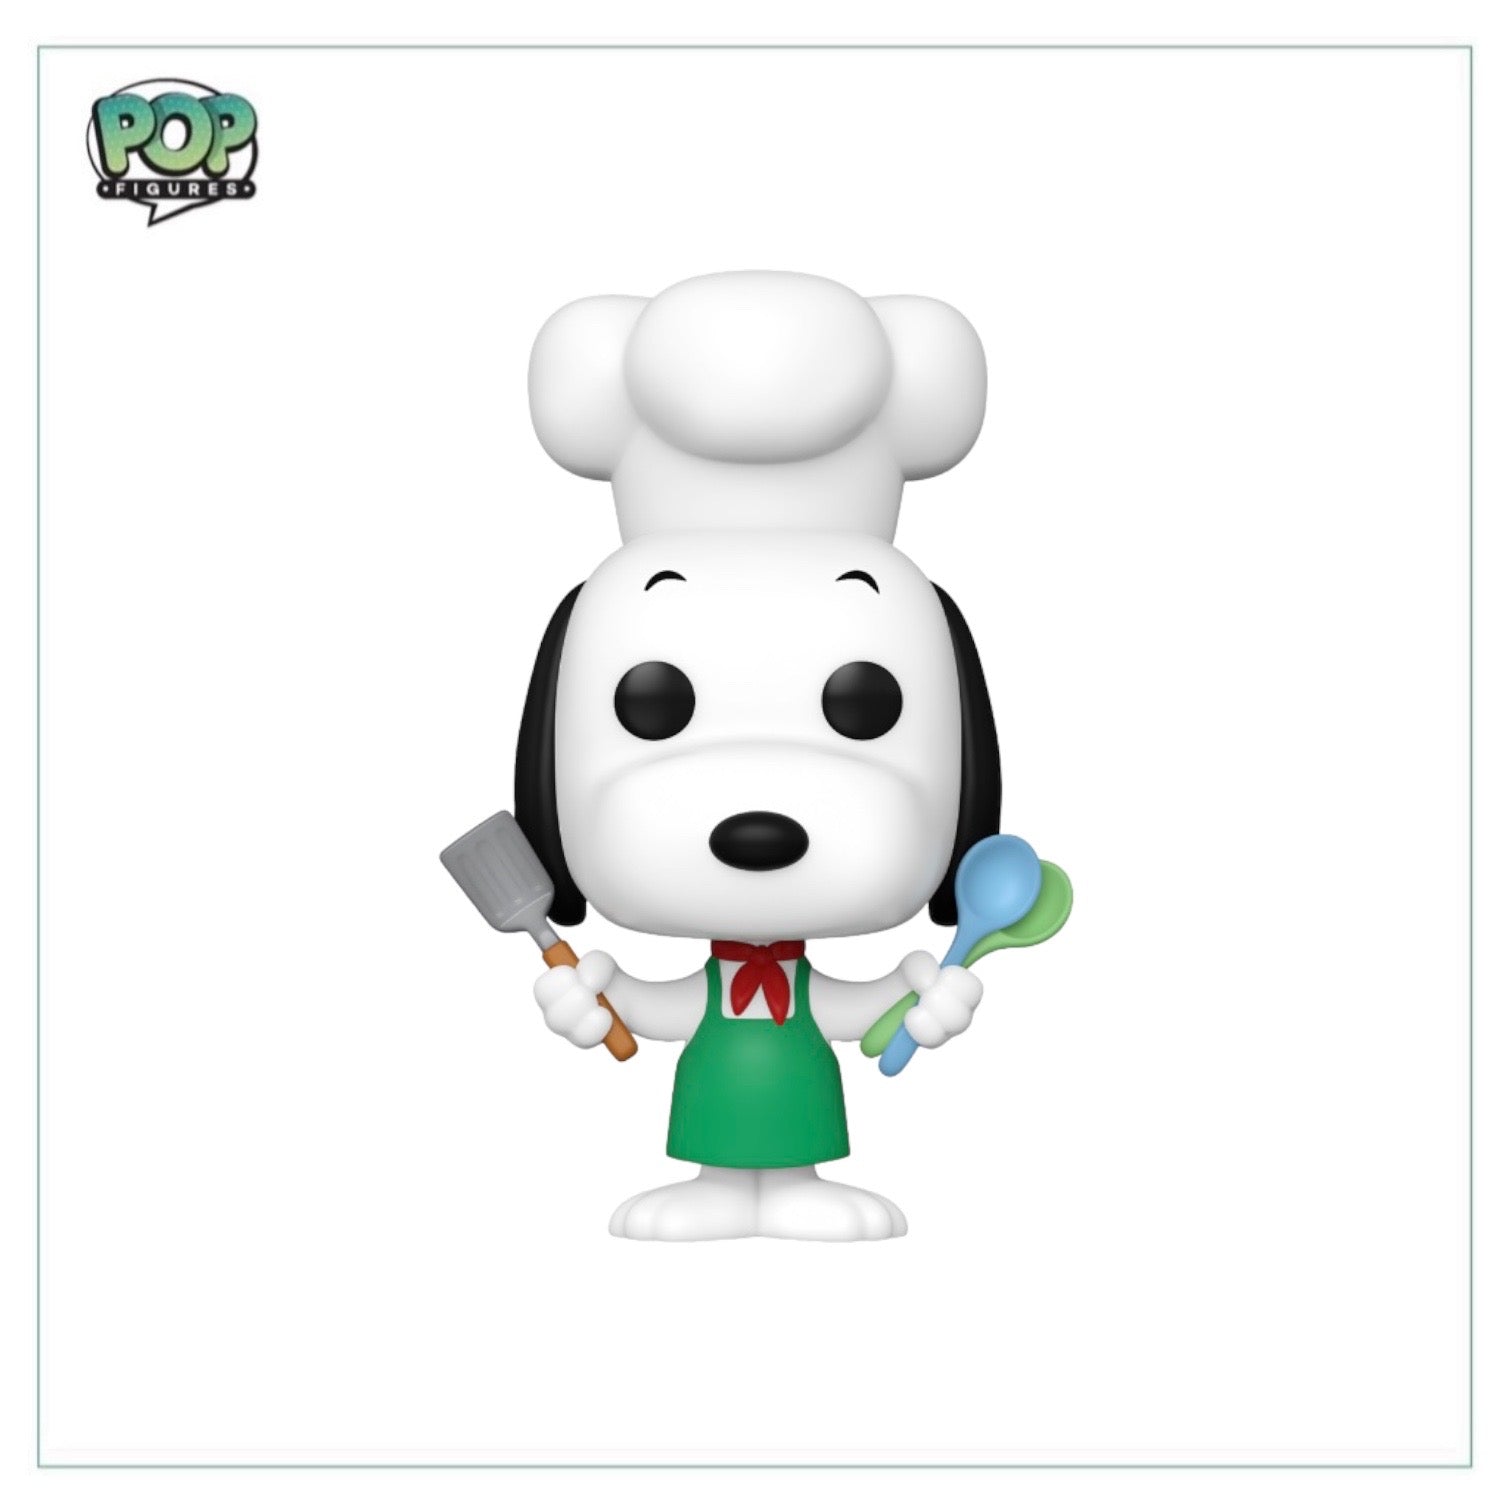 Snoopy #1438 (Chef) Funko Pop! - Snoopy - Boxlunch Exclusive